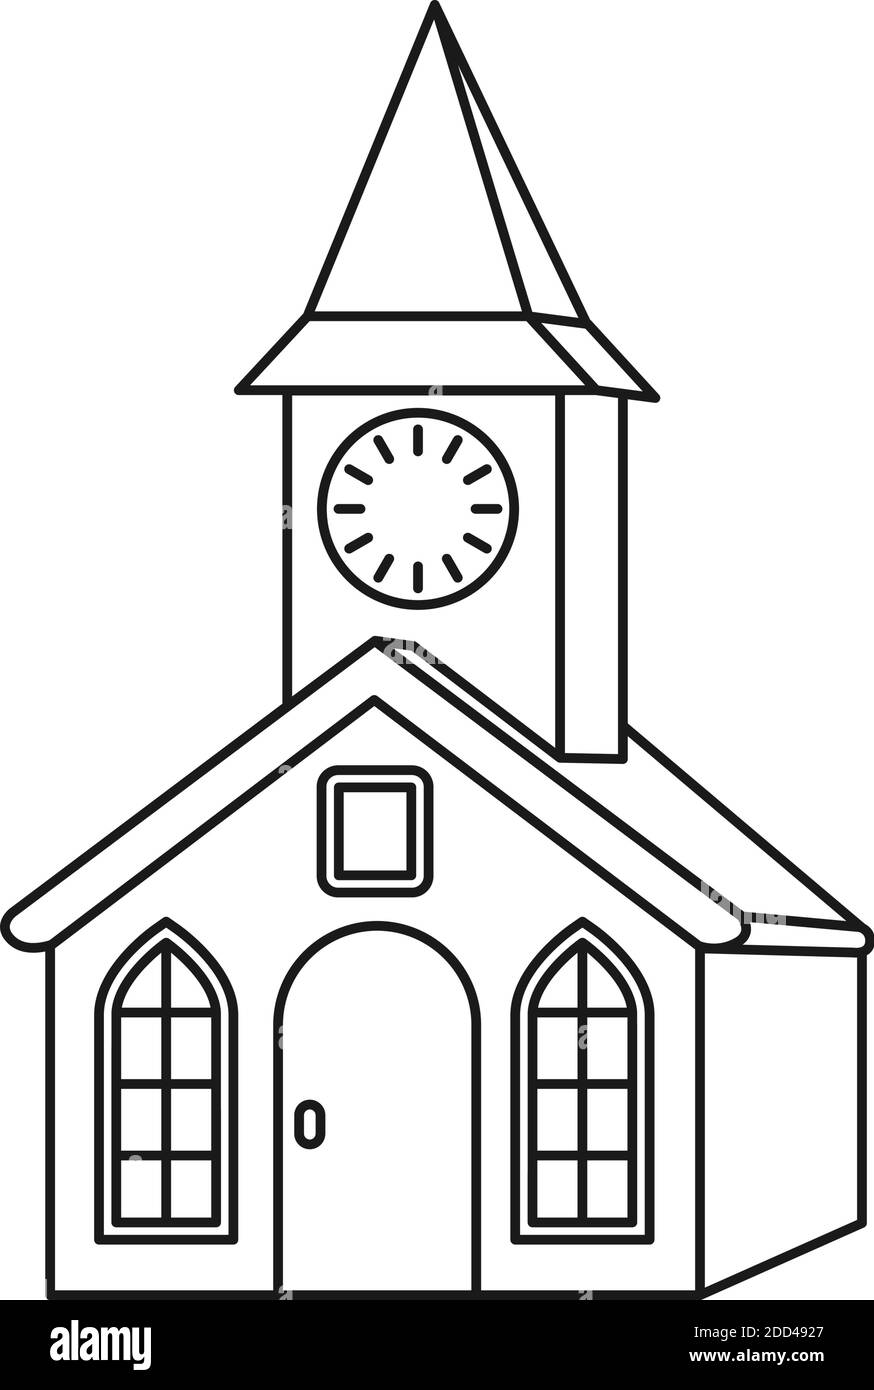 Line art black and white clock tower Stock Vector